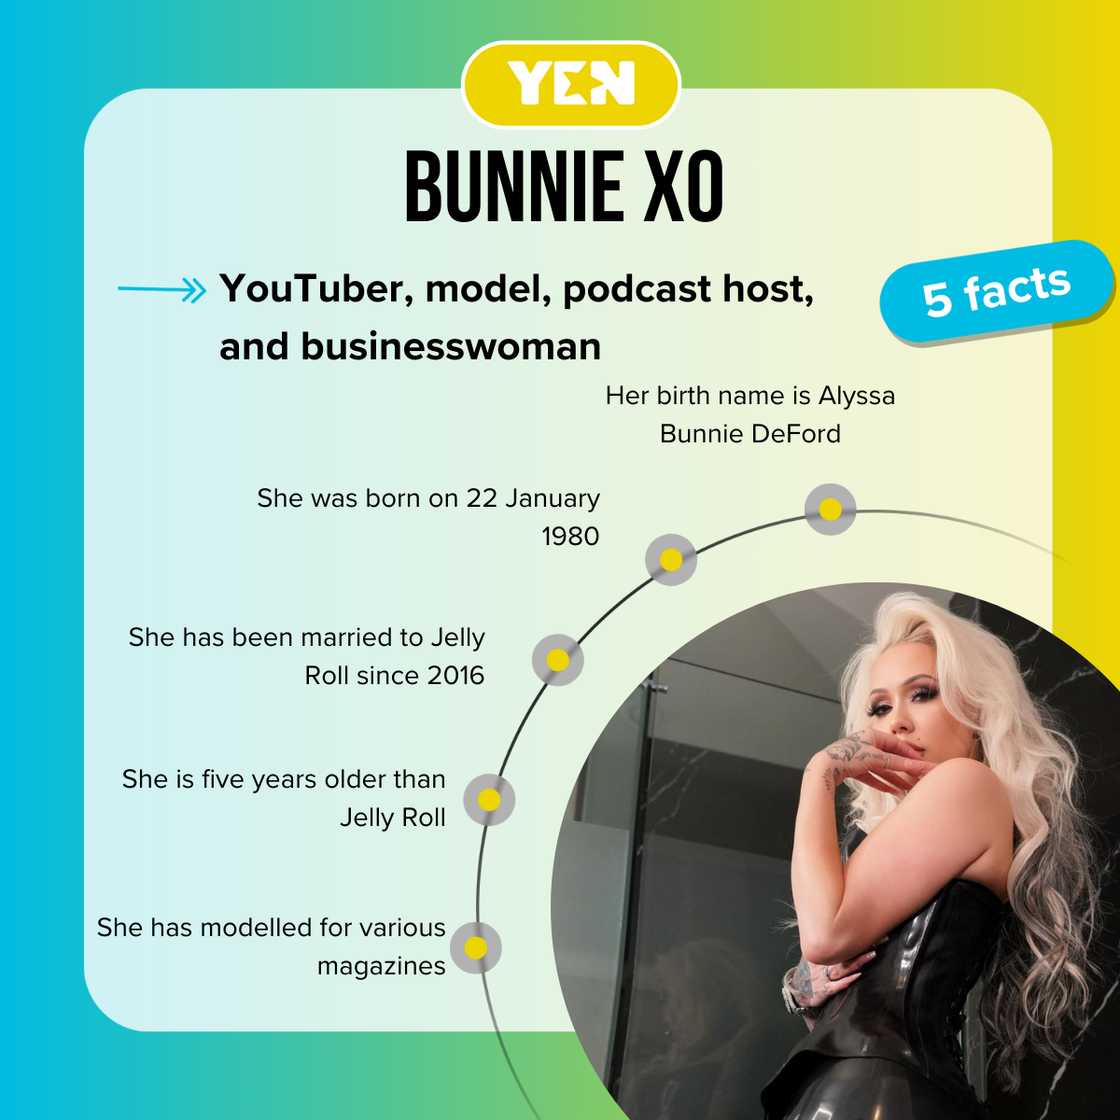 Top 5 facts about Bunnie XO